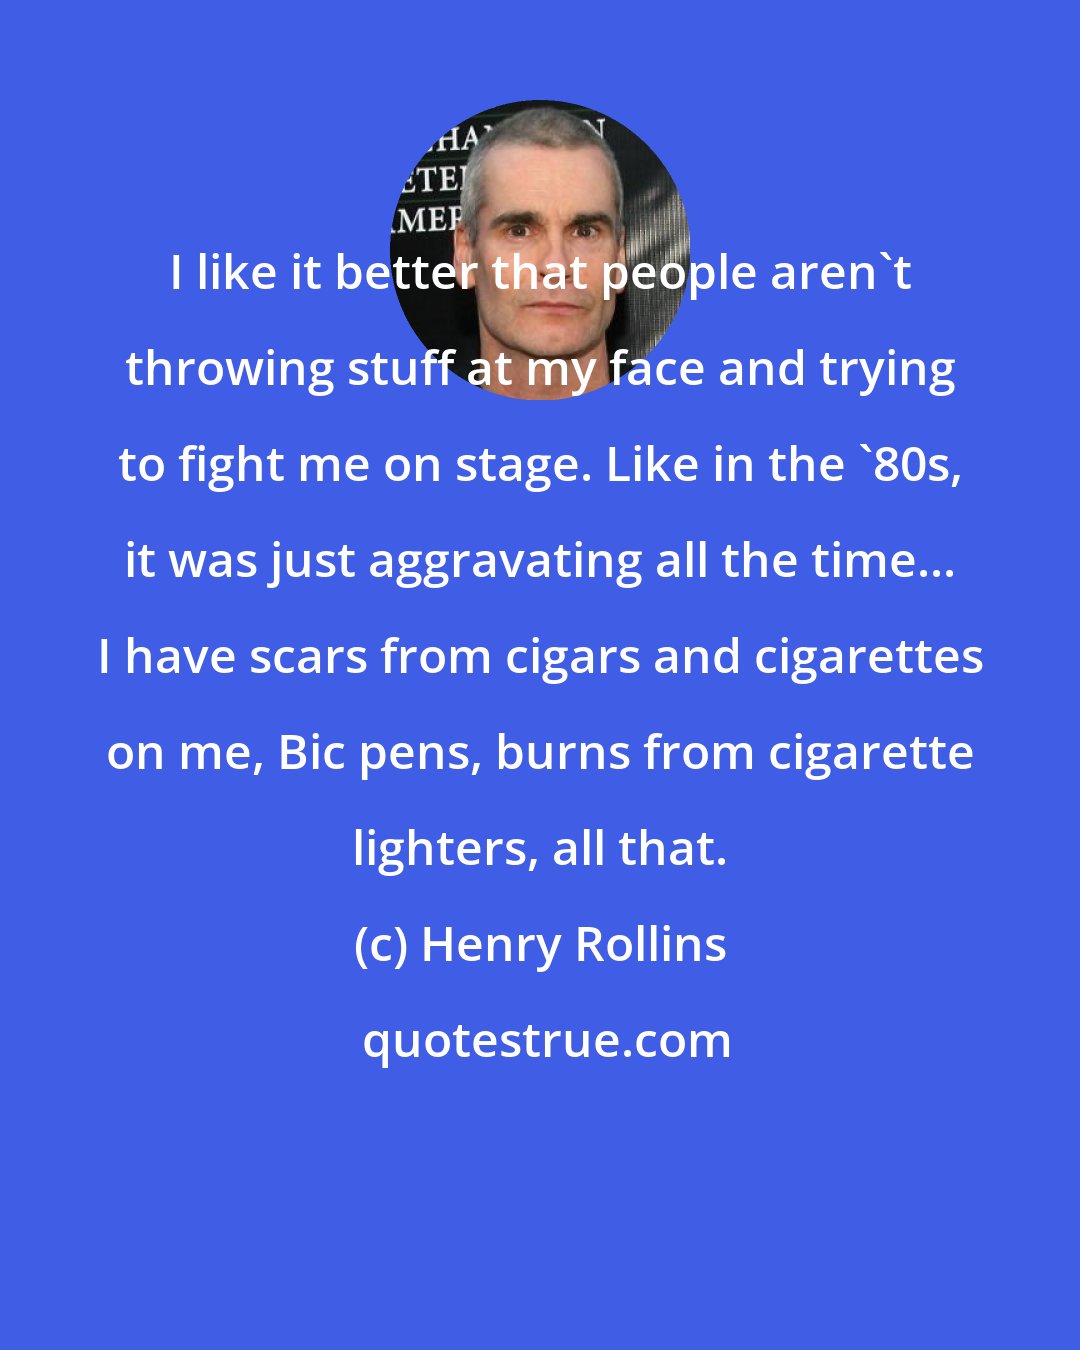 Henry Rollins: I like it better that people aren't throwing stuff at my face and trying to fight me on stage. Like in the '80s, it was just aggravating all the time... I have scars from cigars and cigarettes on me, Bic pens, burns from cigarette lighters, all that.